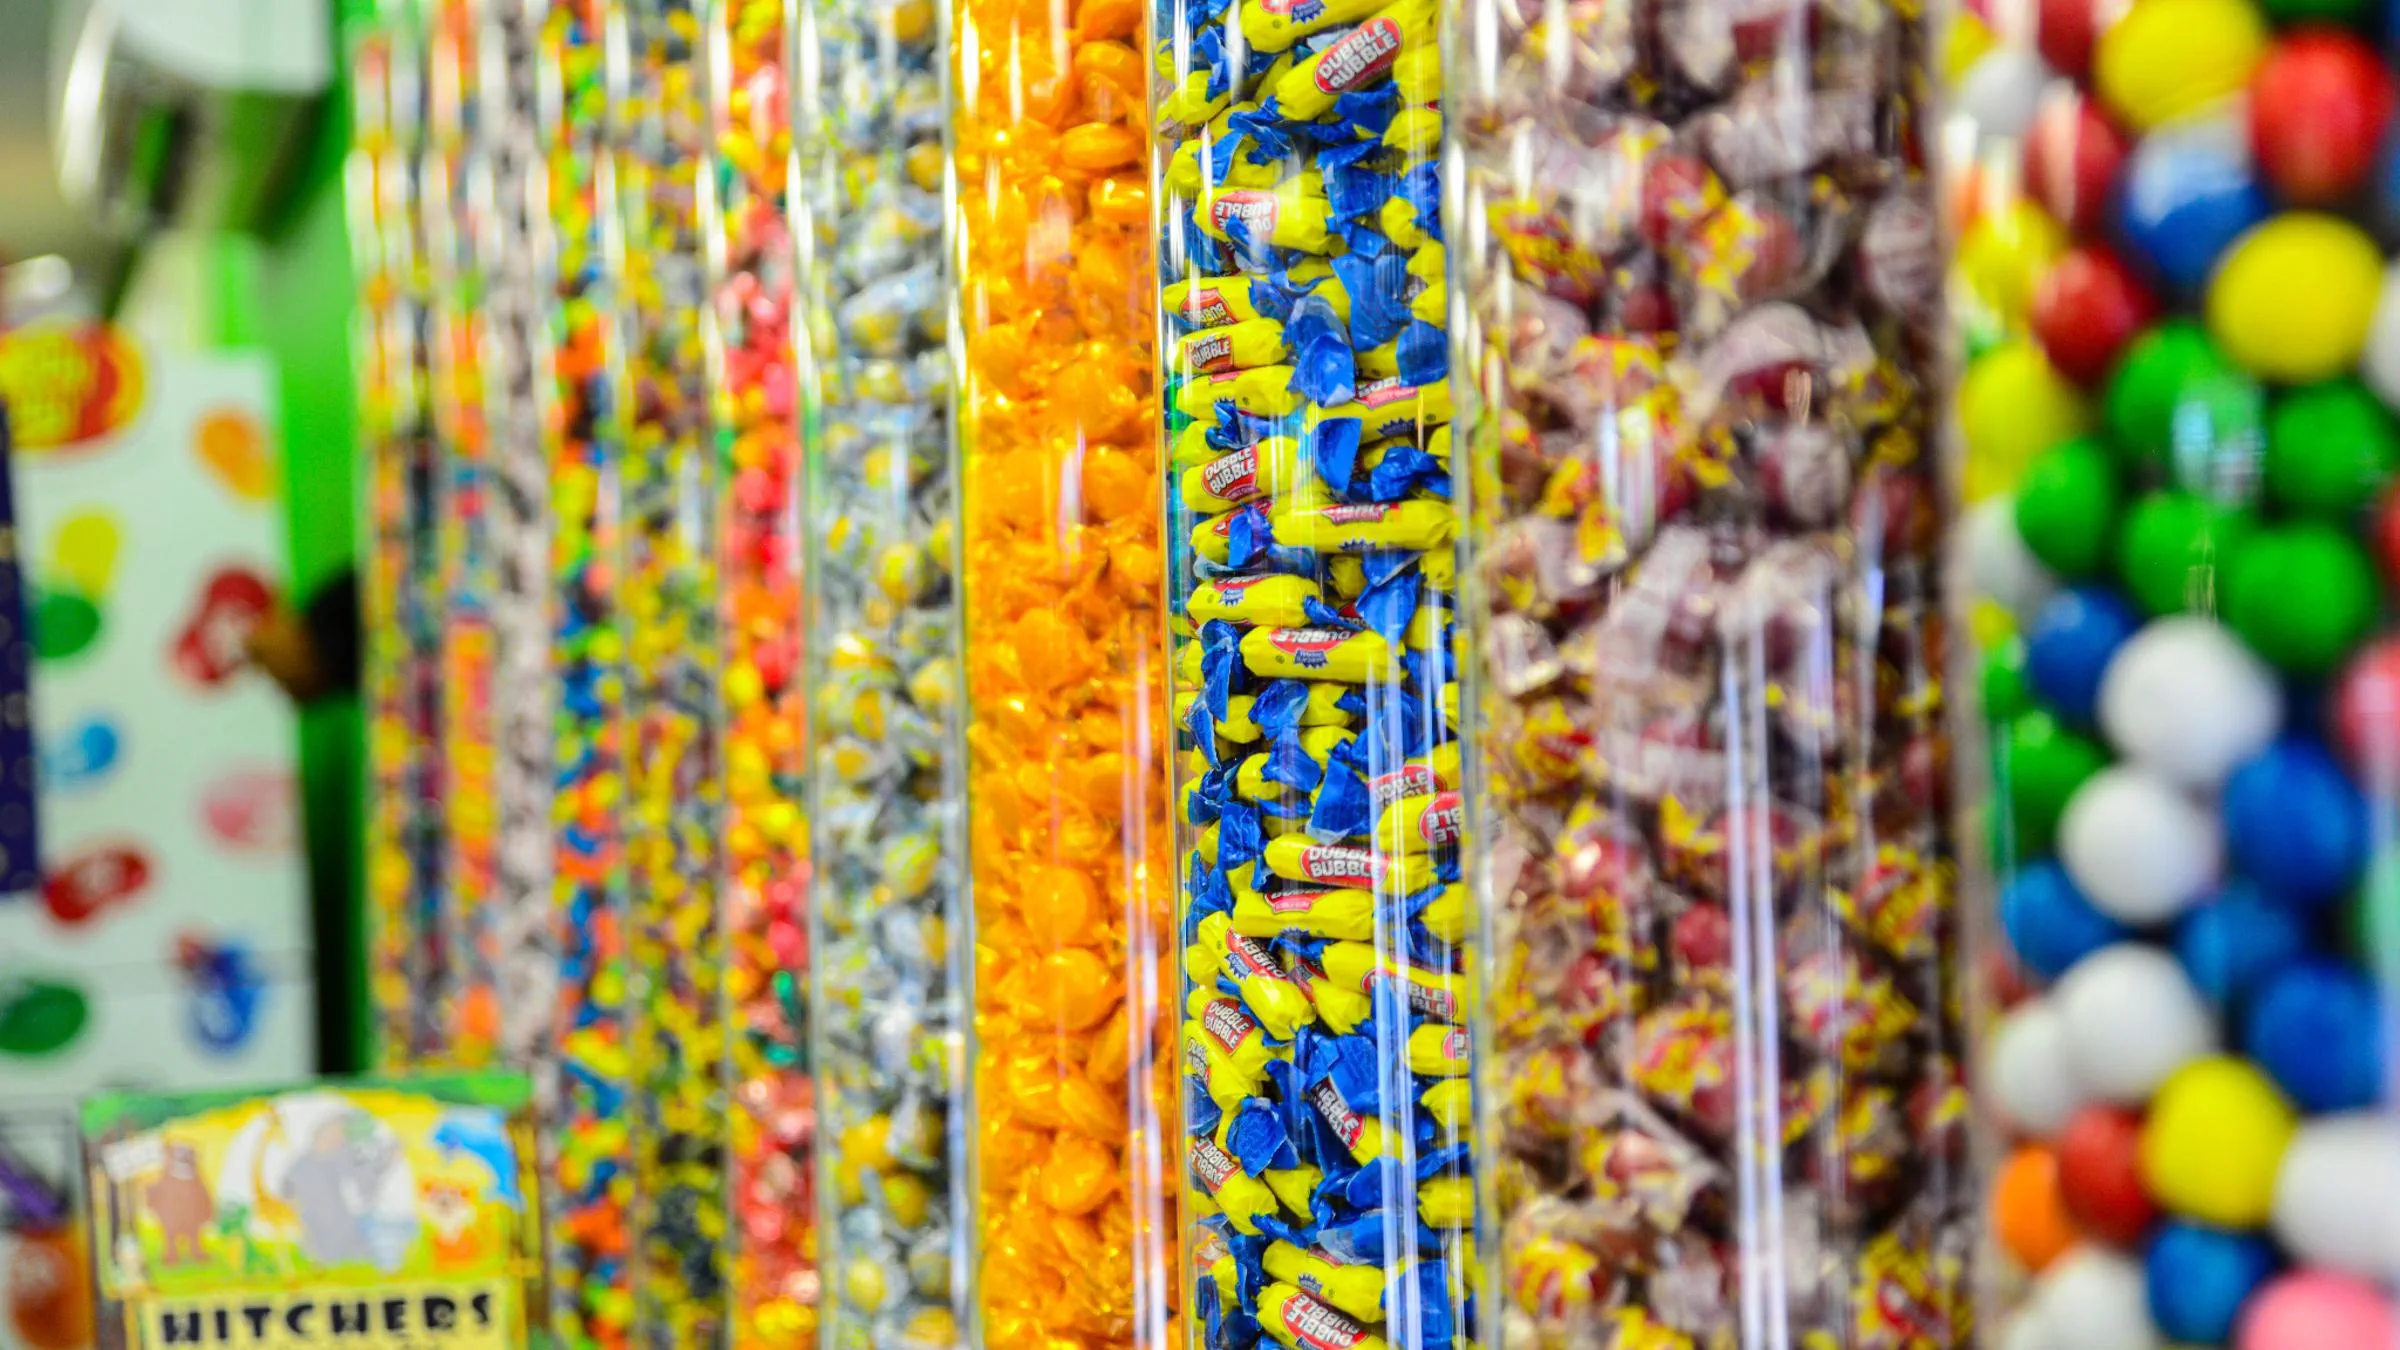 Mountain Sweets Candy Store at Stratton